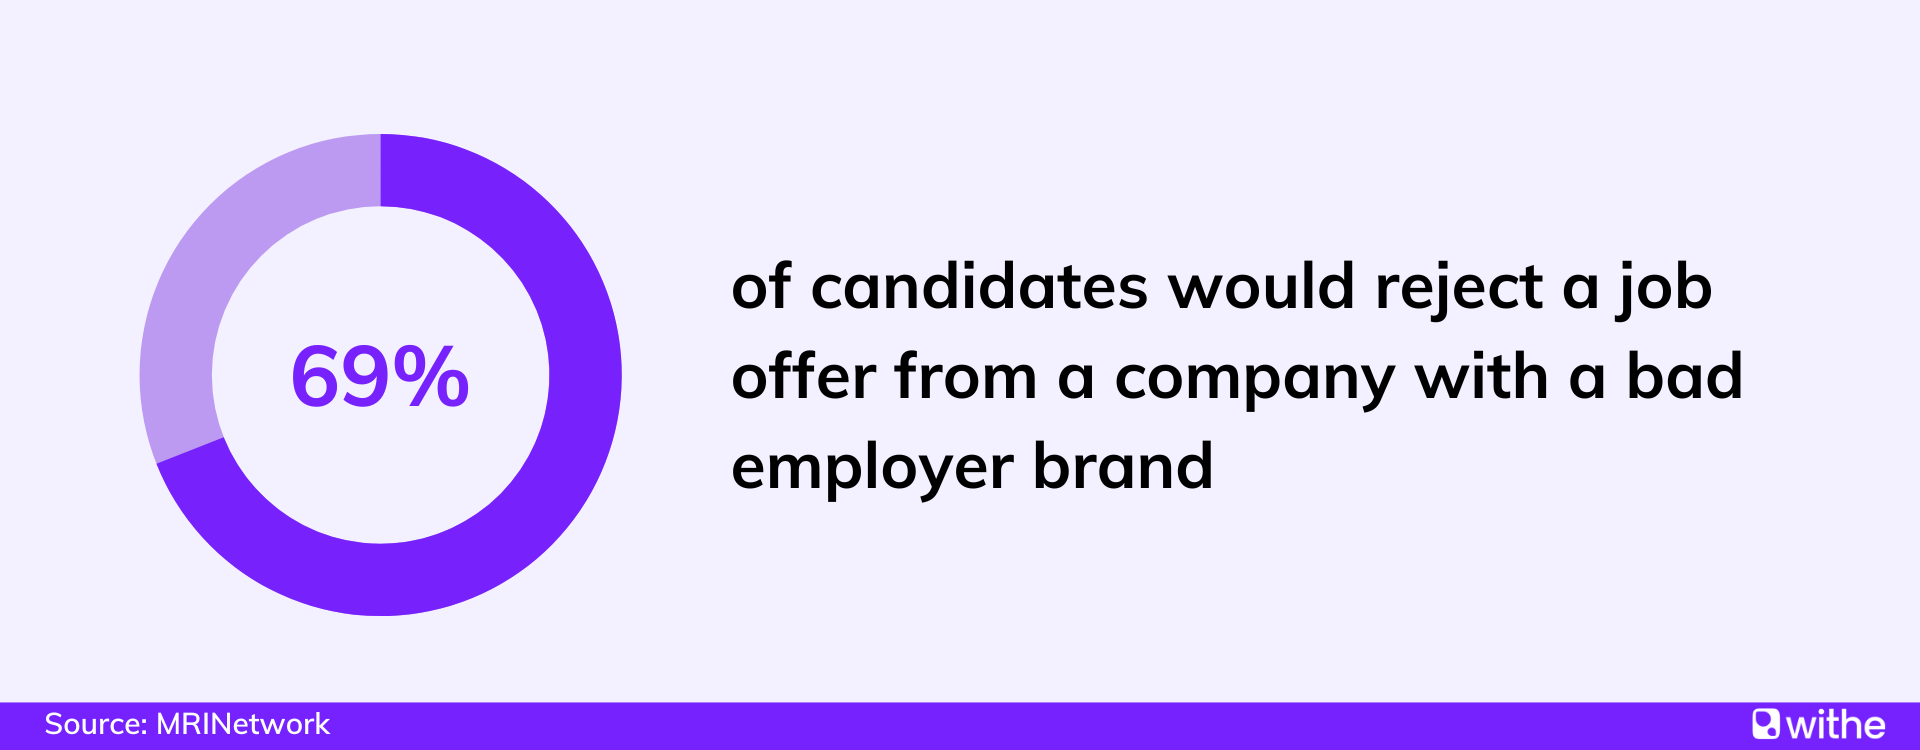 Employer brand statistics - 69% of candidates would reject a job offer from a company with a bad employer brand